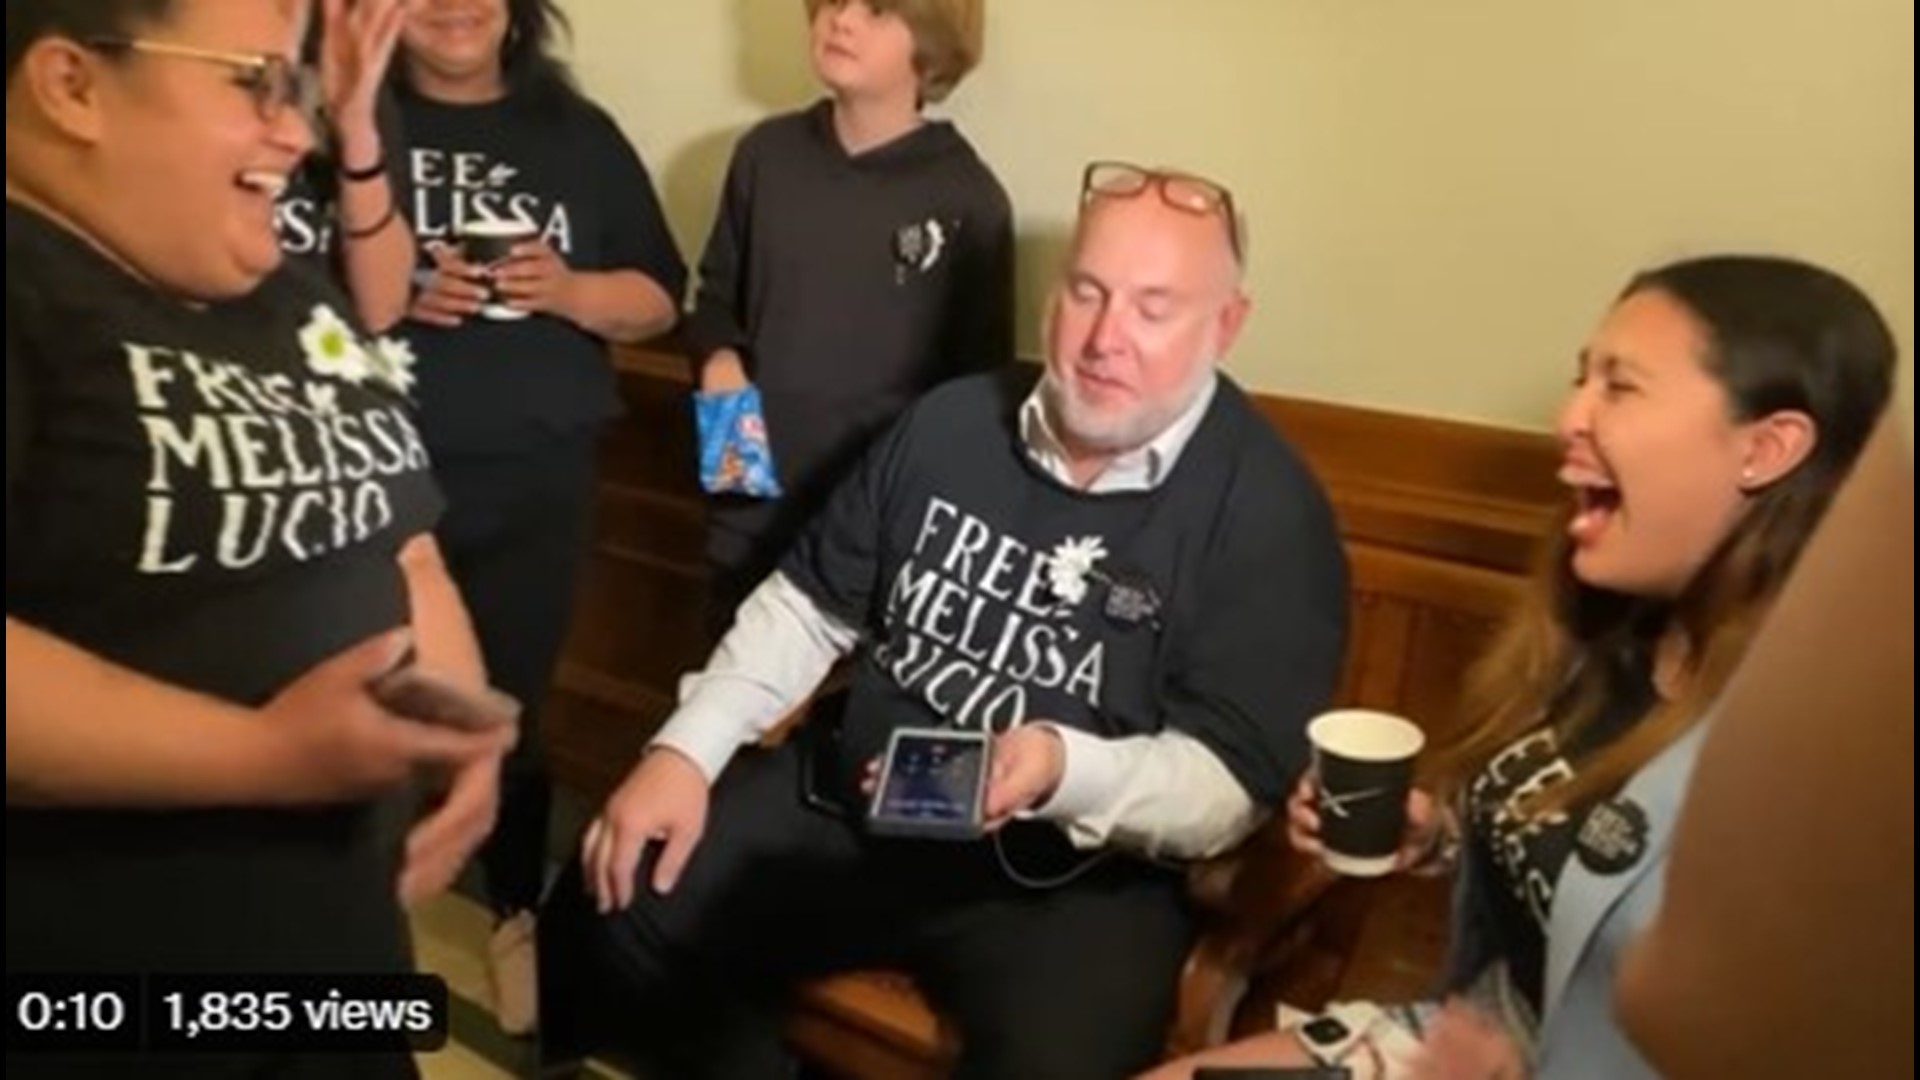 Her supporters got the news while waiting outside of Gov. Greg Abbott's office. They called Lucio's son, John, who was on his way to death row to tell his mom.